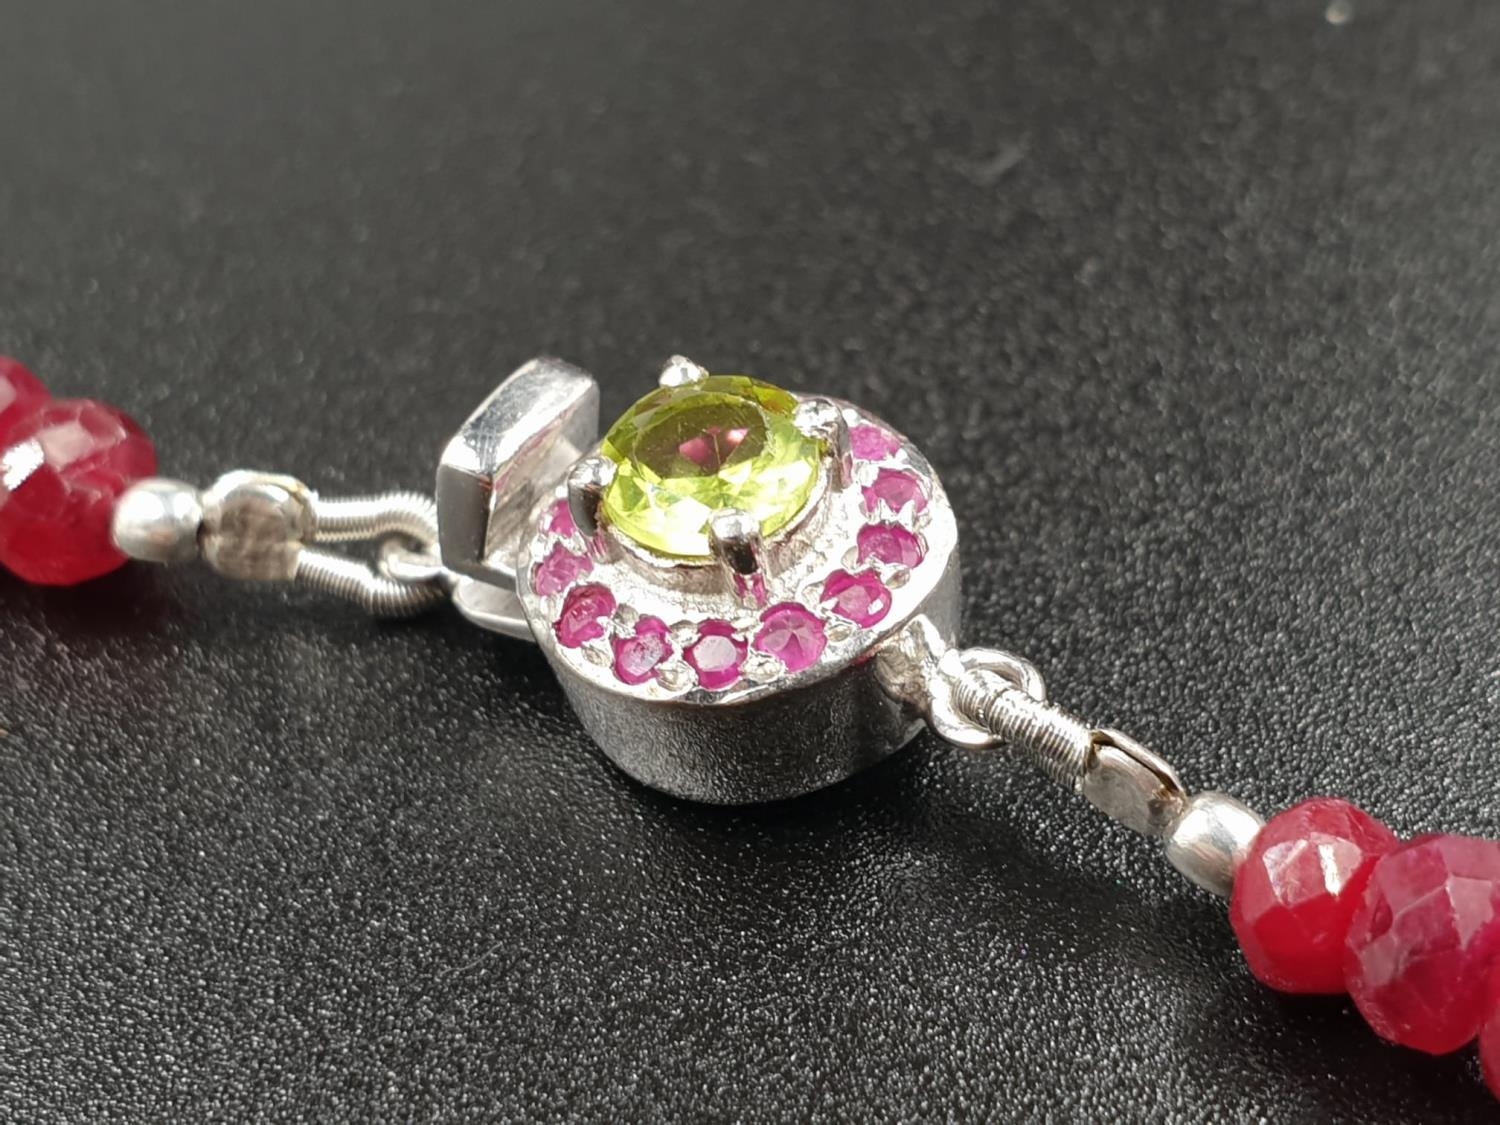 A 220cts single row Africa ruby necklace with a sterling silver ruby and peridot gemstone clasp 47cm - Image 5 of 7